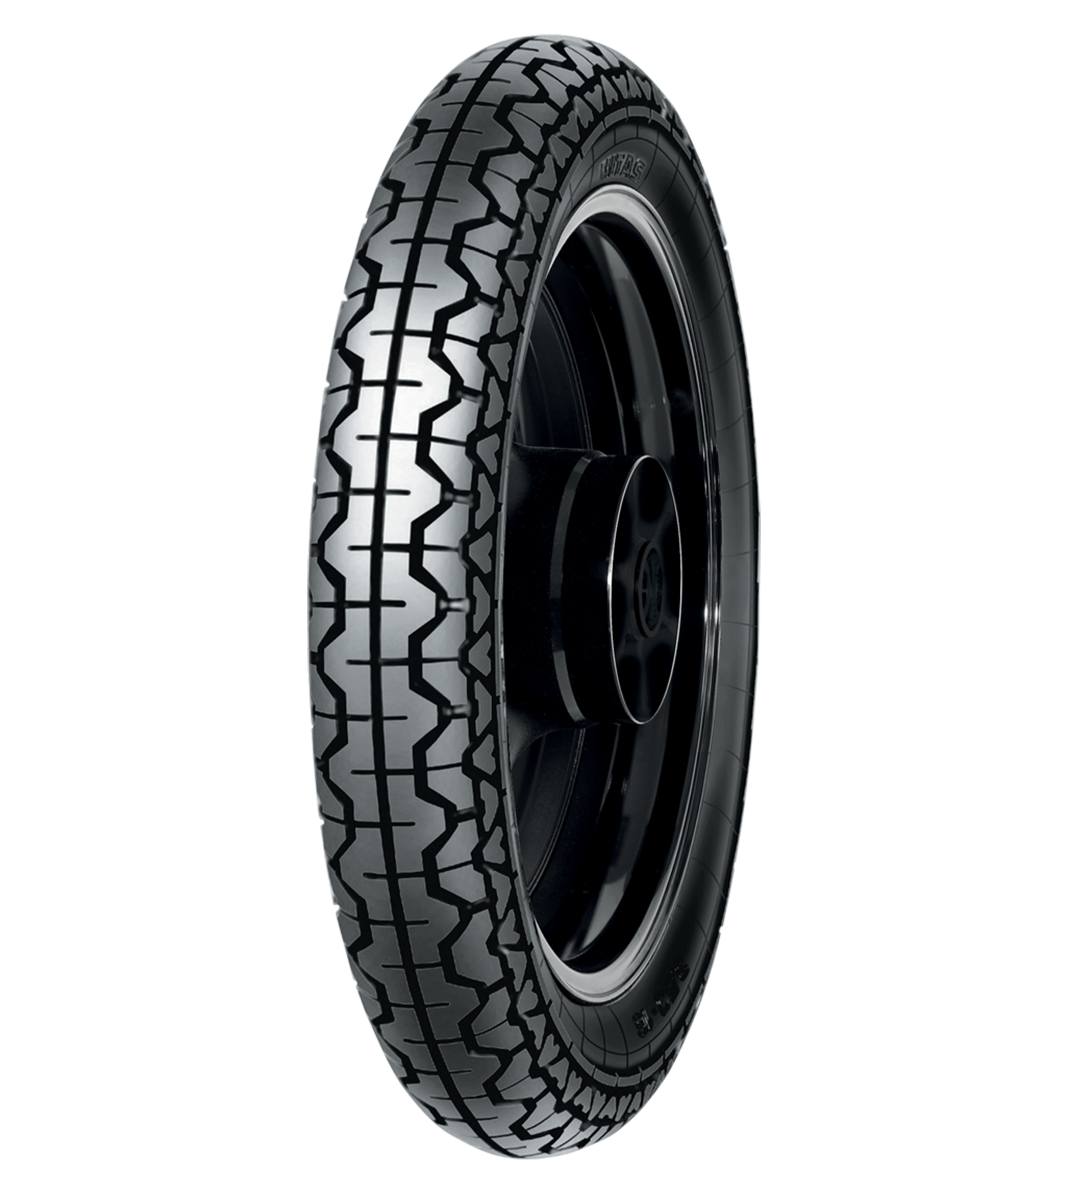 Mitas H-06 4.00-18 Motorcycle Classic On-Road 64S No Stripe Tube Rear Tire, 223511, 4.00-18, Classic, H-06, Motorcycle Classic, On-Road, Rear, Tires - Imported and distributed in North & South America by Lindeco Genuine Powersports - Premier Powersports Equipment and Accessories for Motorcycle Enthusiasts, Professional Riders and Dealers.